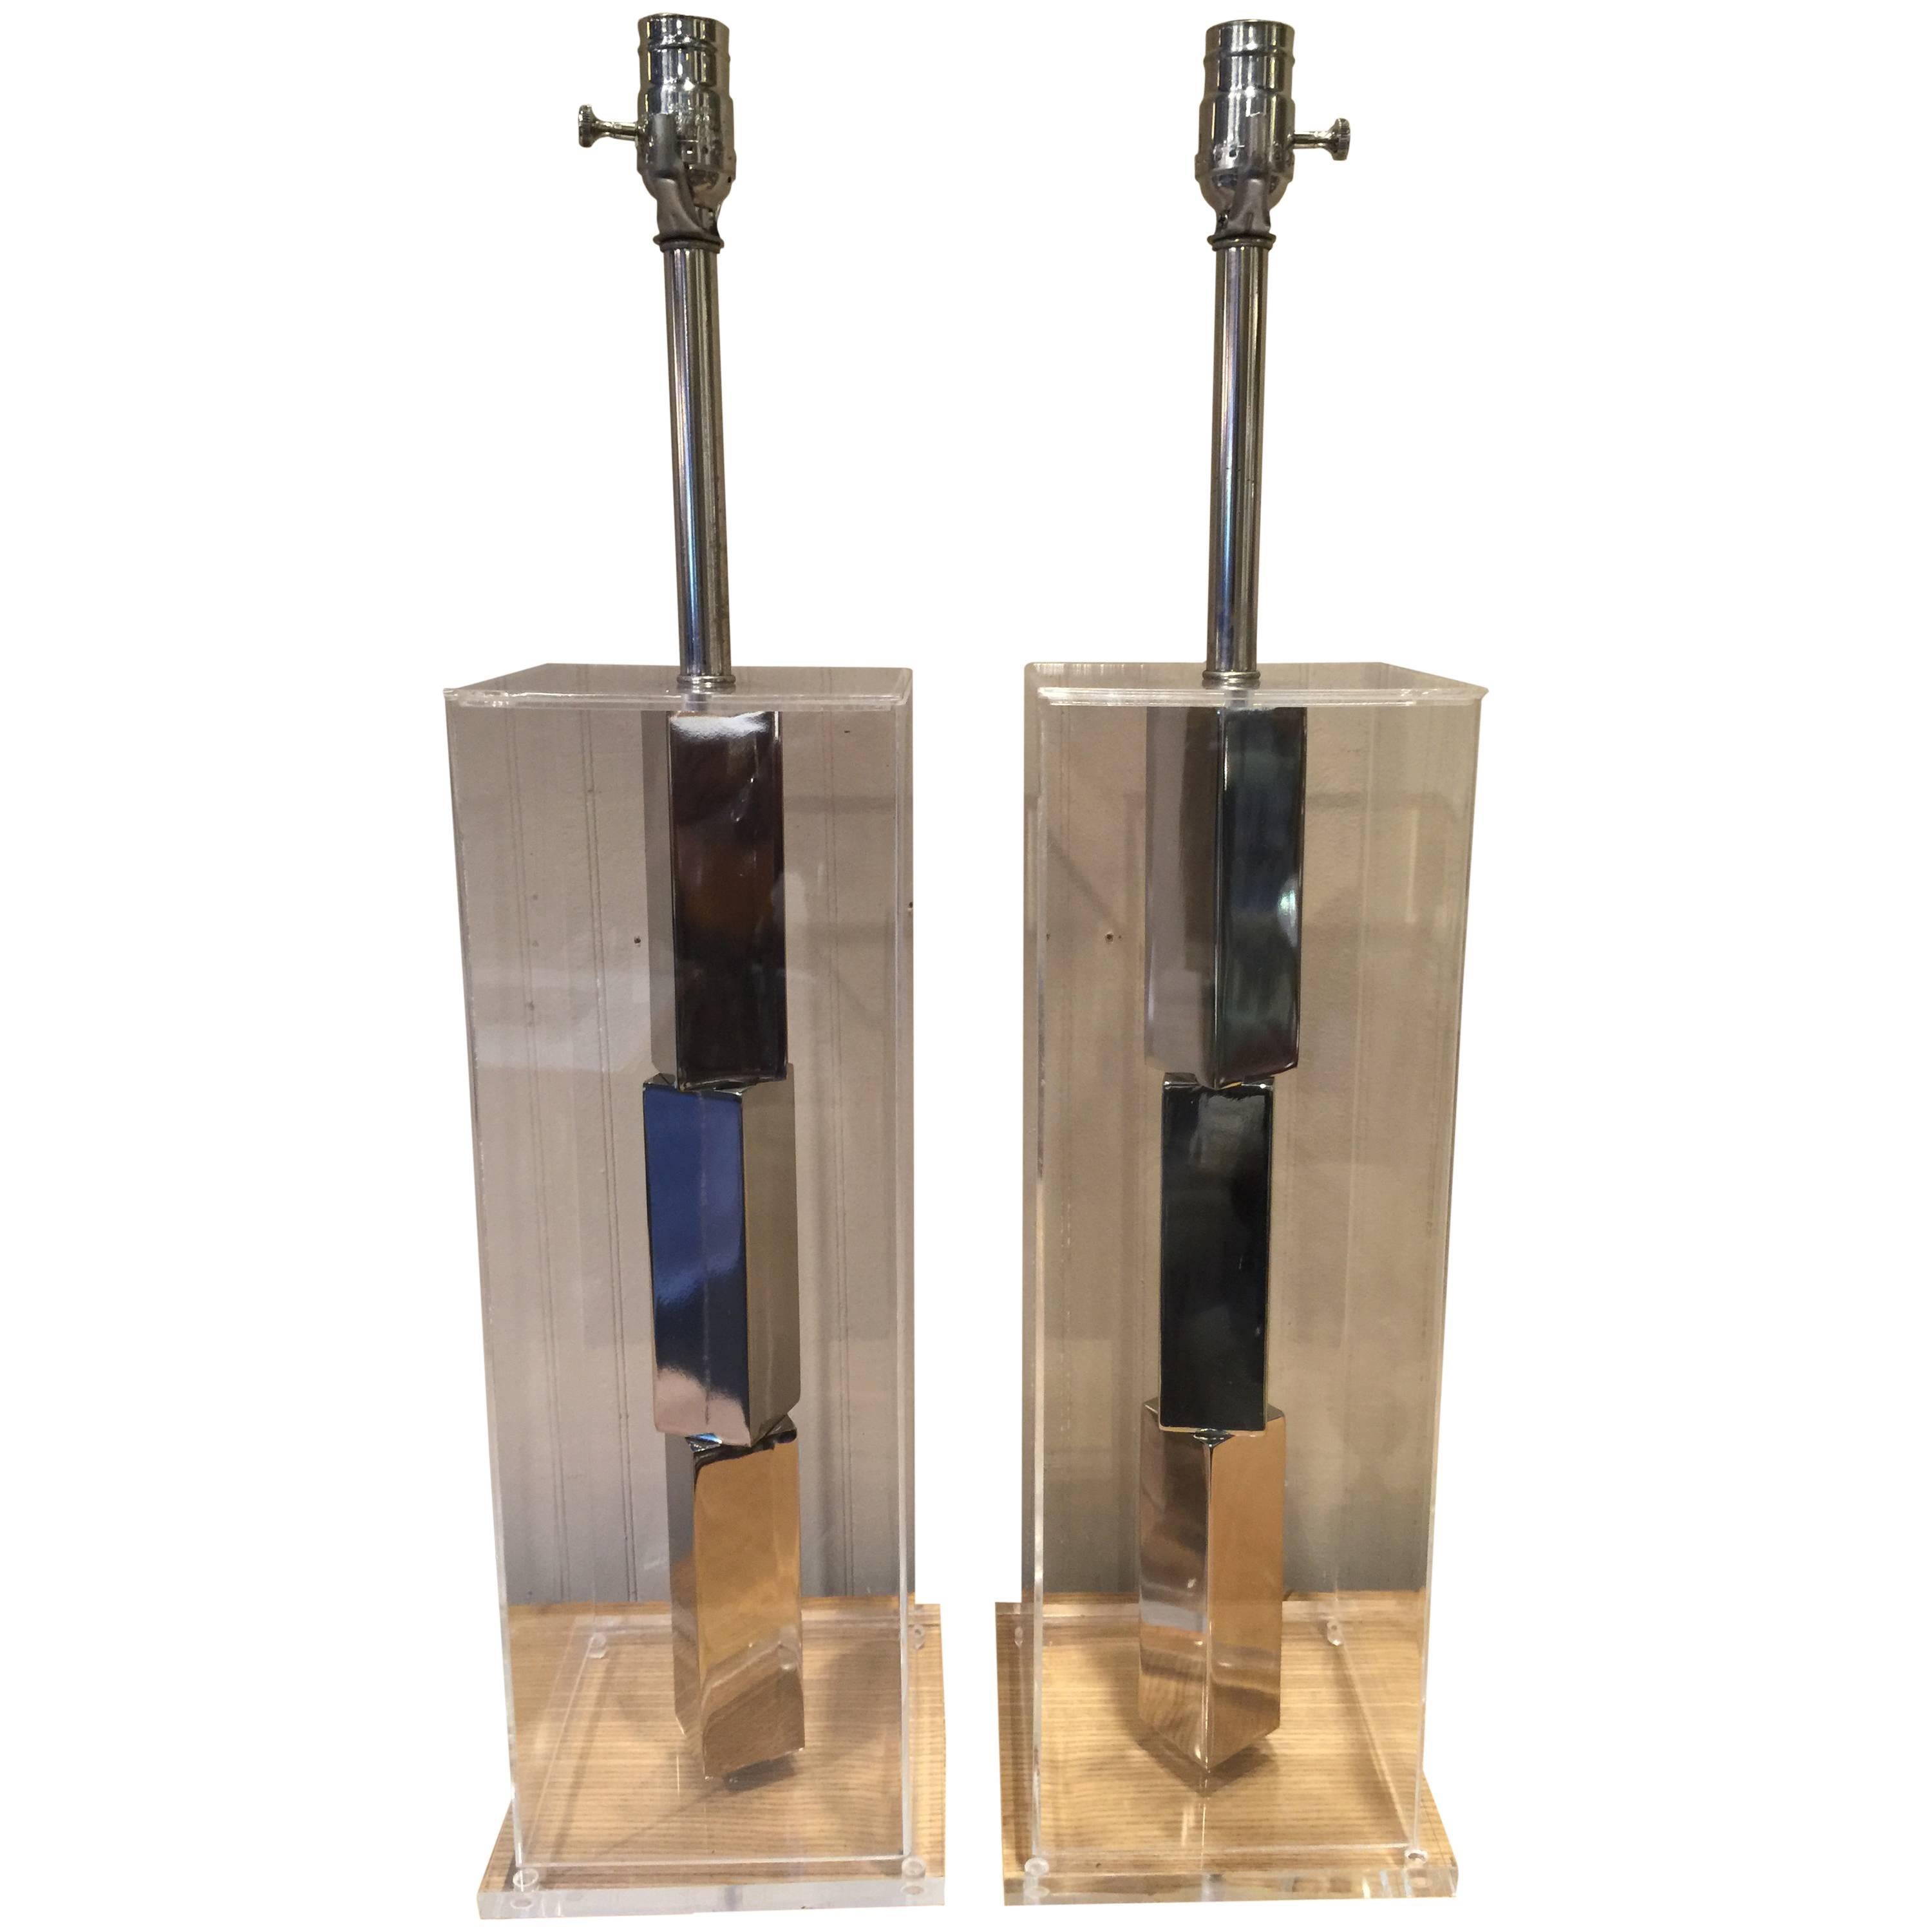 Pair of architectural Lucite lamps, each one a rectangular cube with interior stacked chrome blocks, in the style of Sol LeWitt. Shades are for display purposes only.